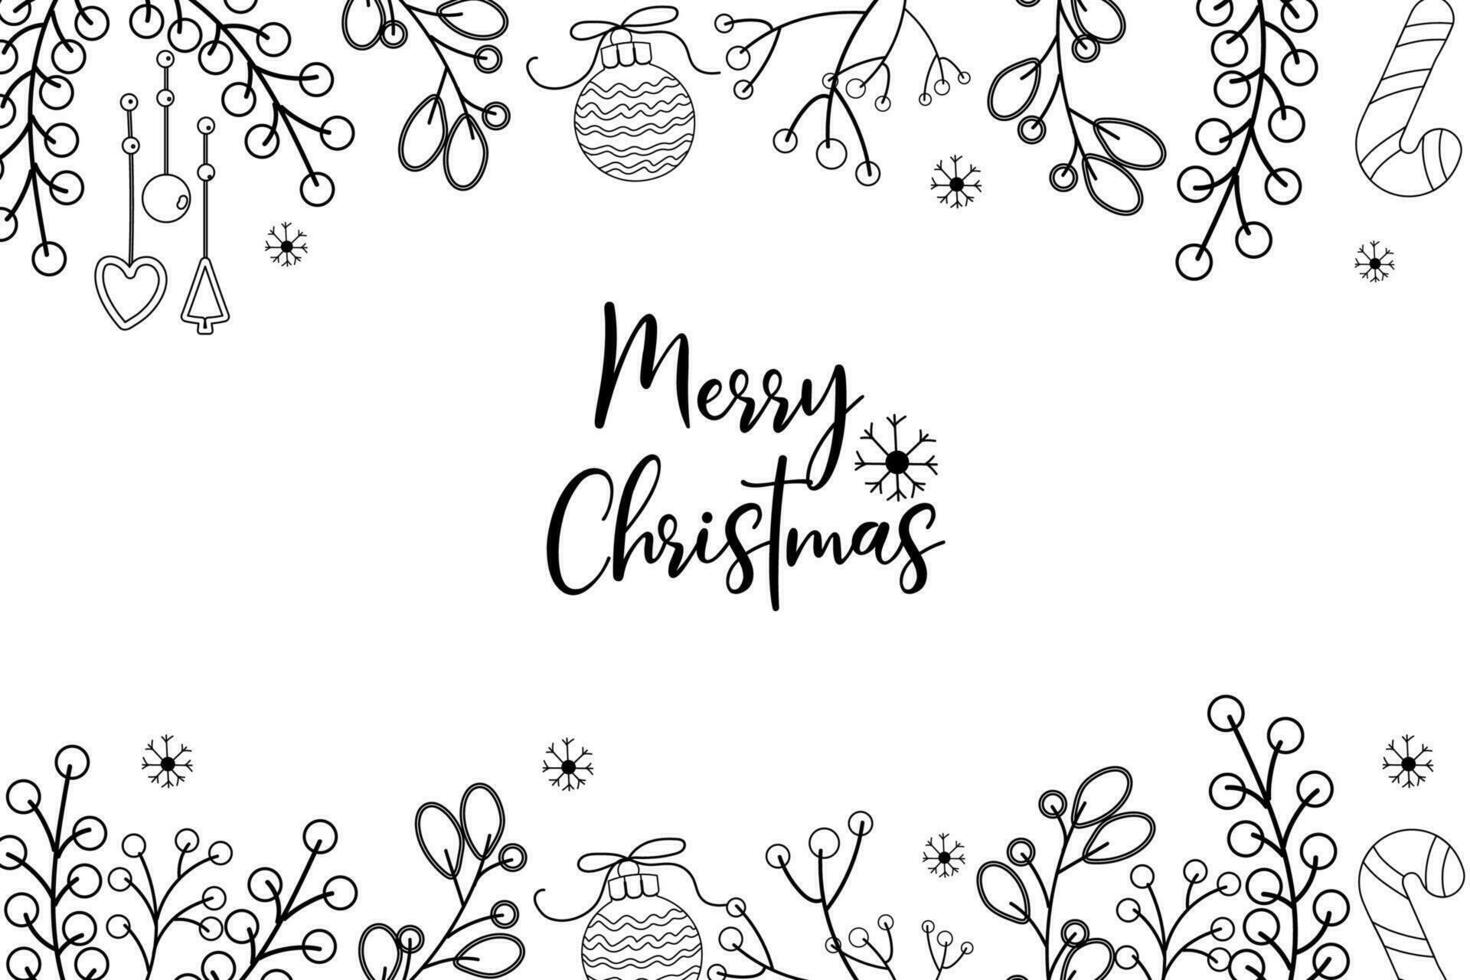 Hand drawn outline Christmas background vector